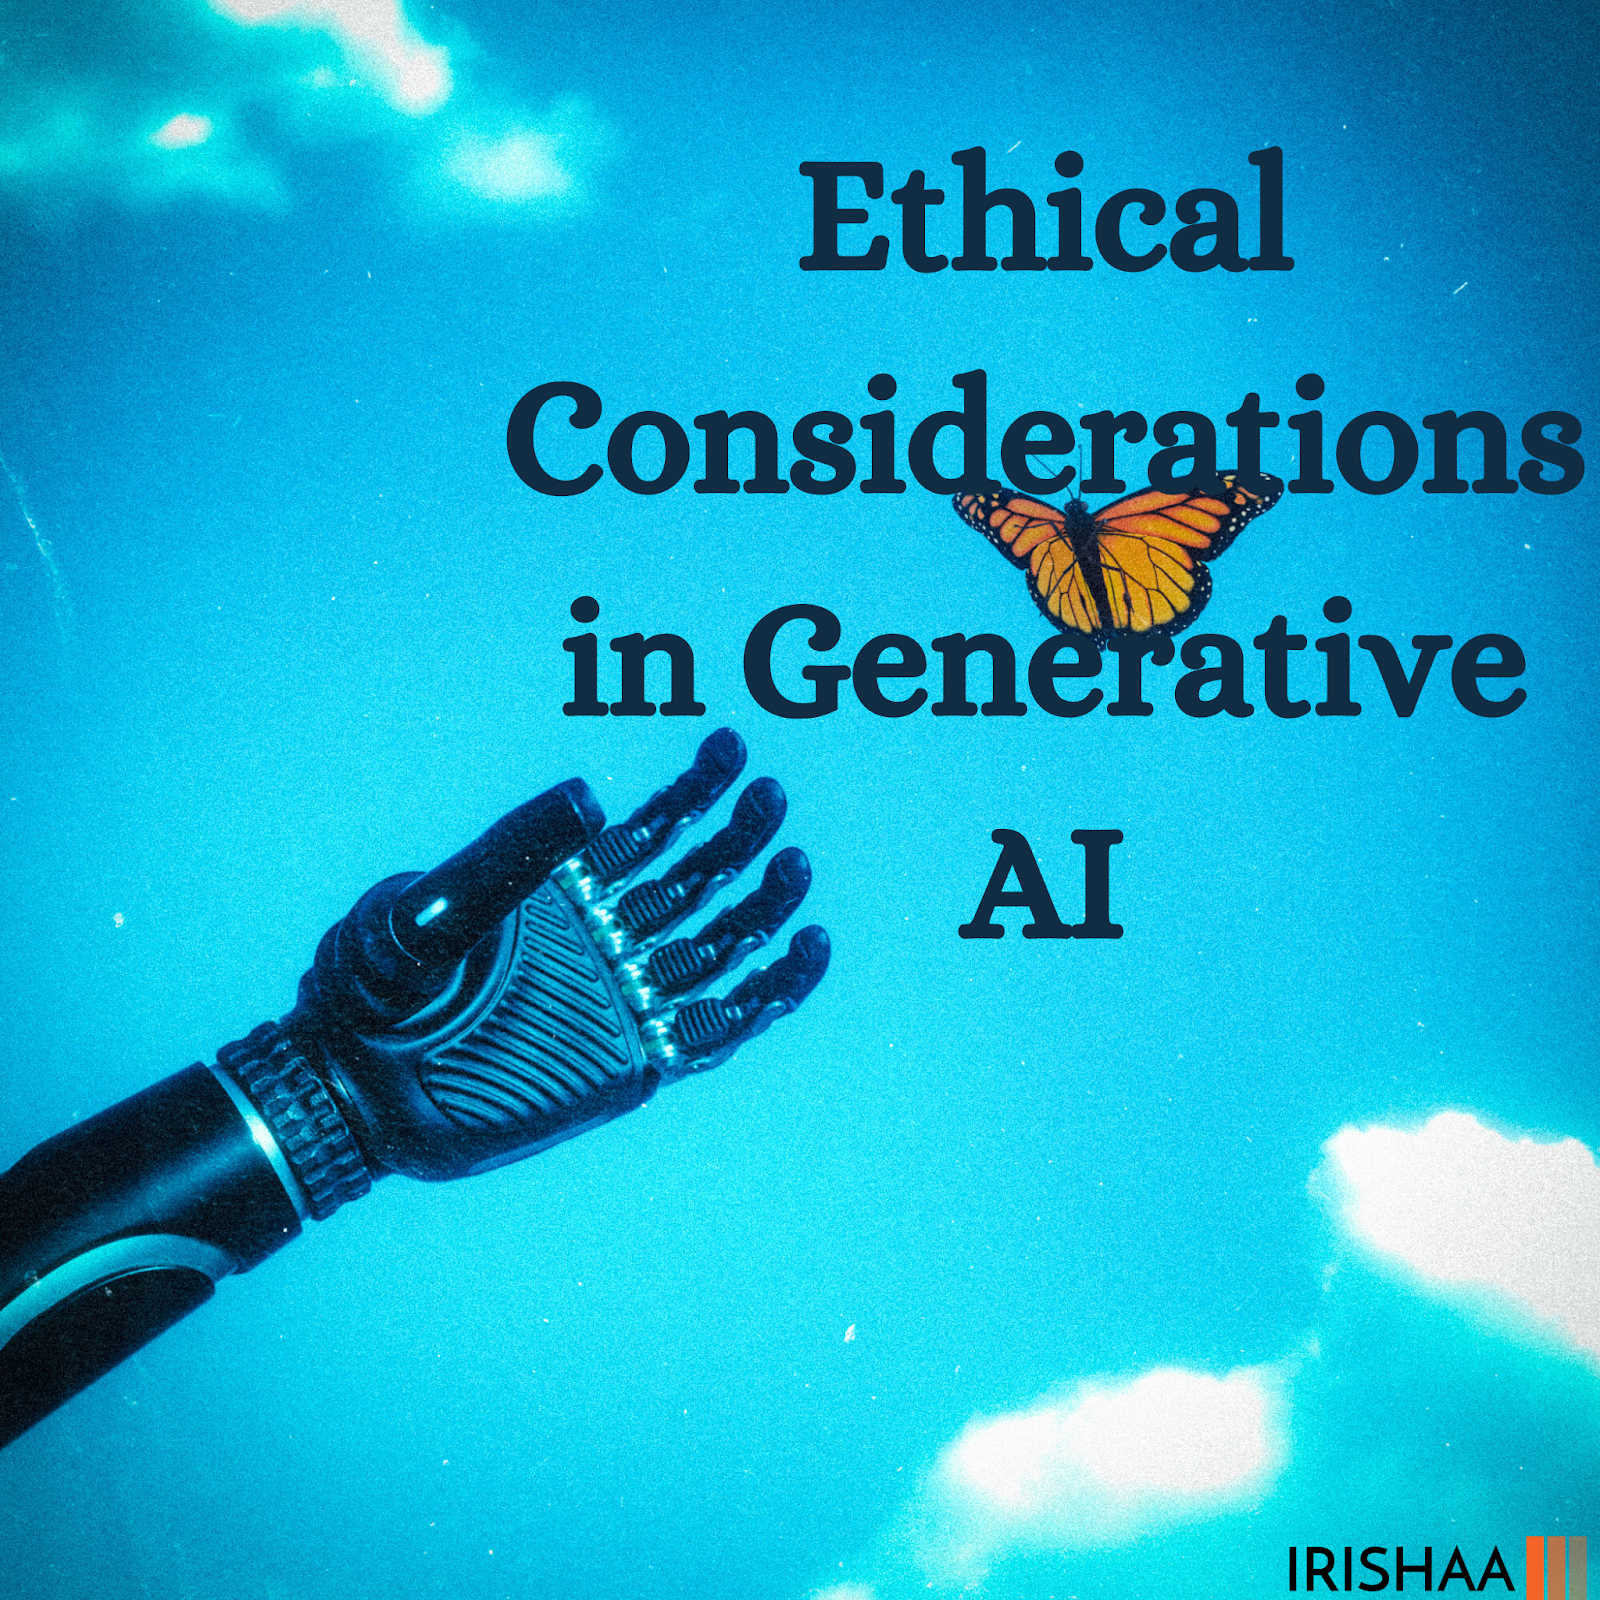 Ethical Considerations in Generative AI
